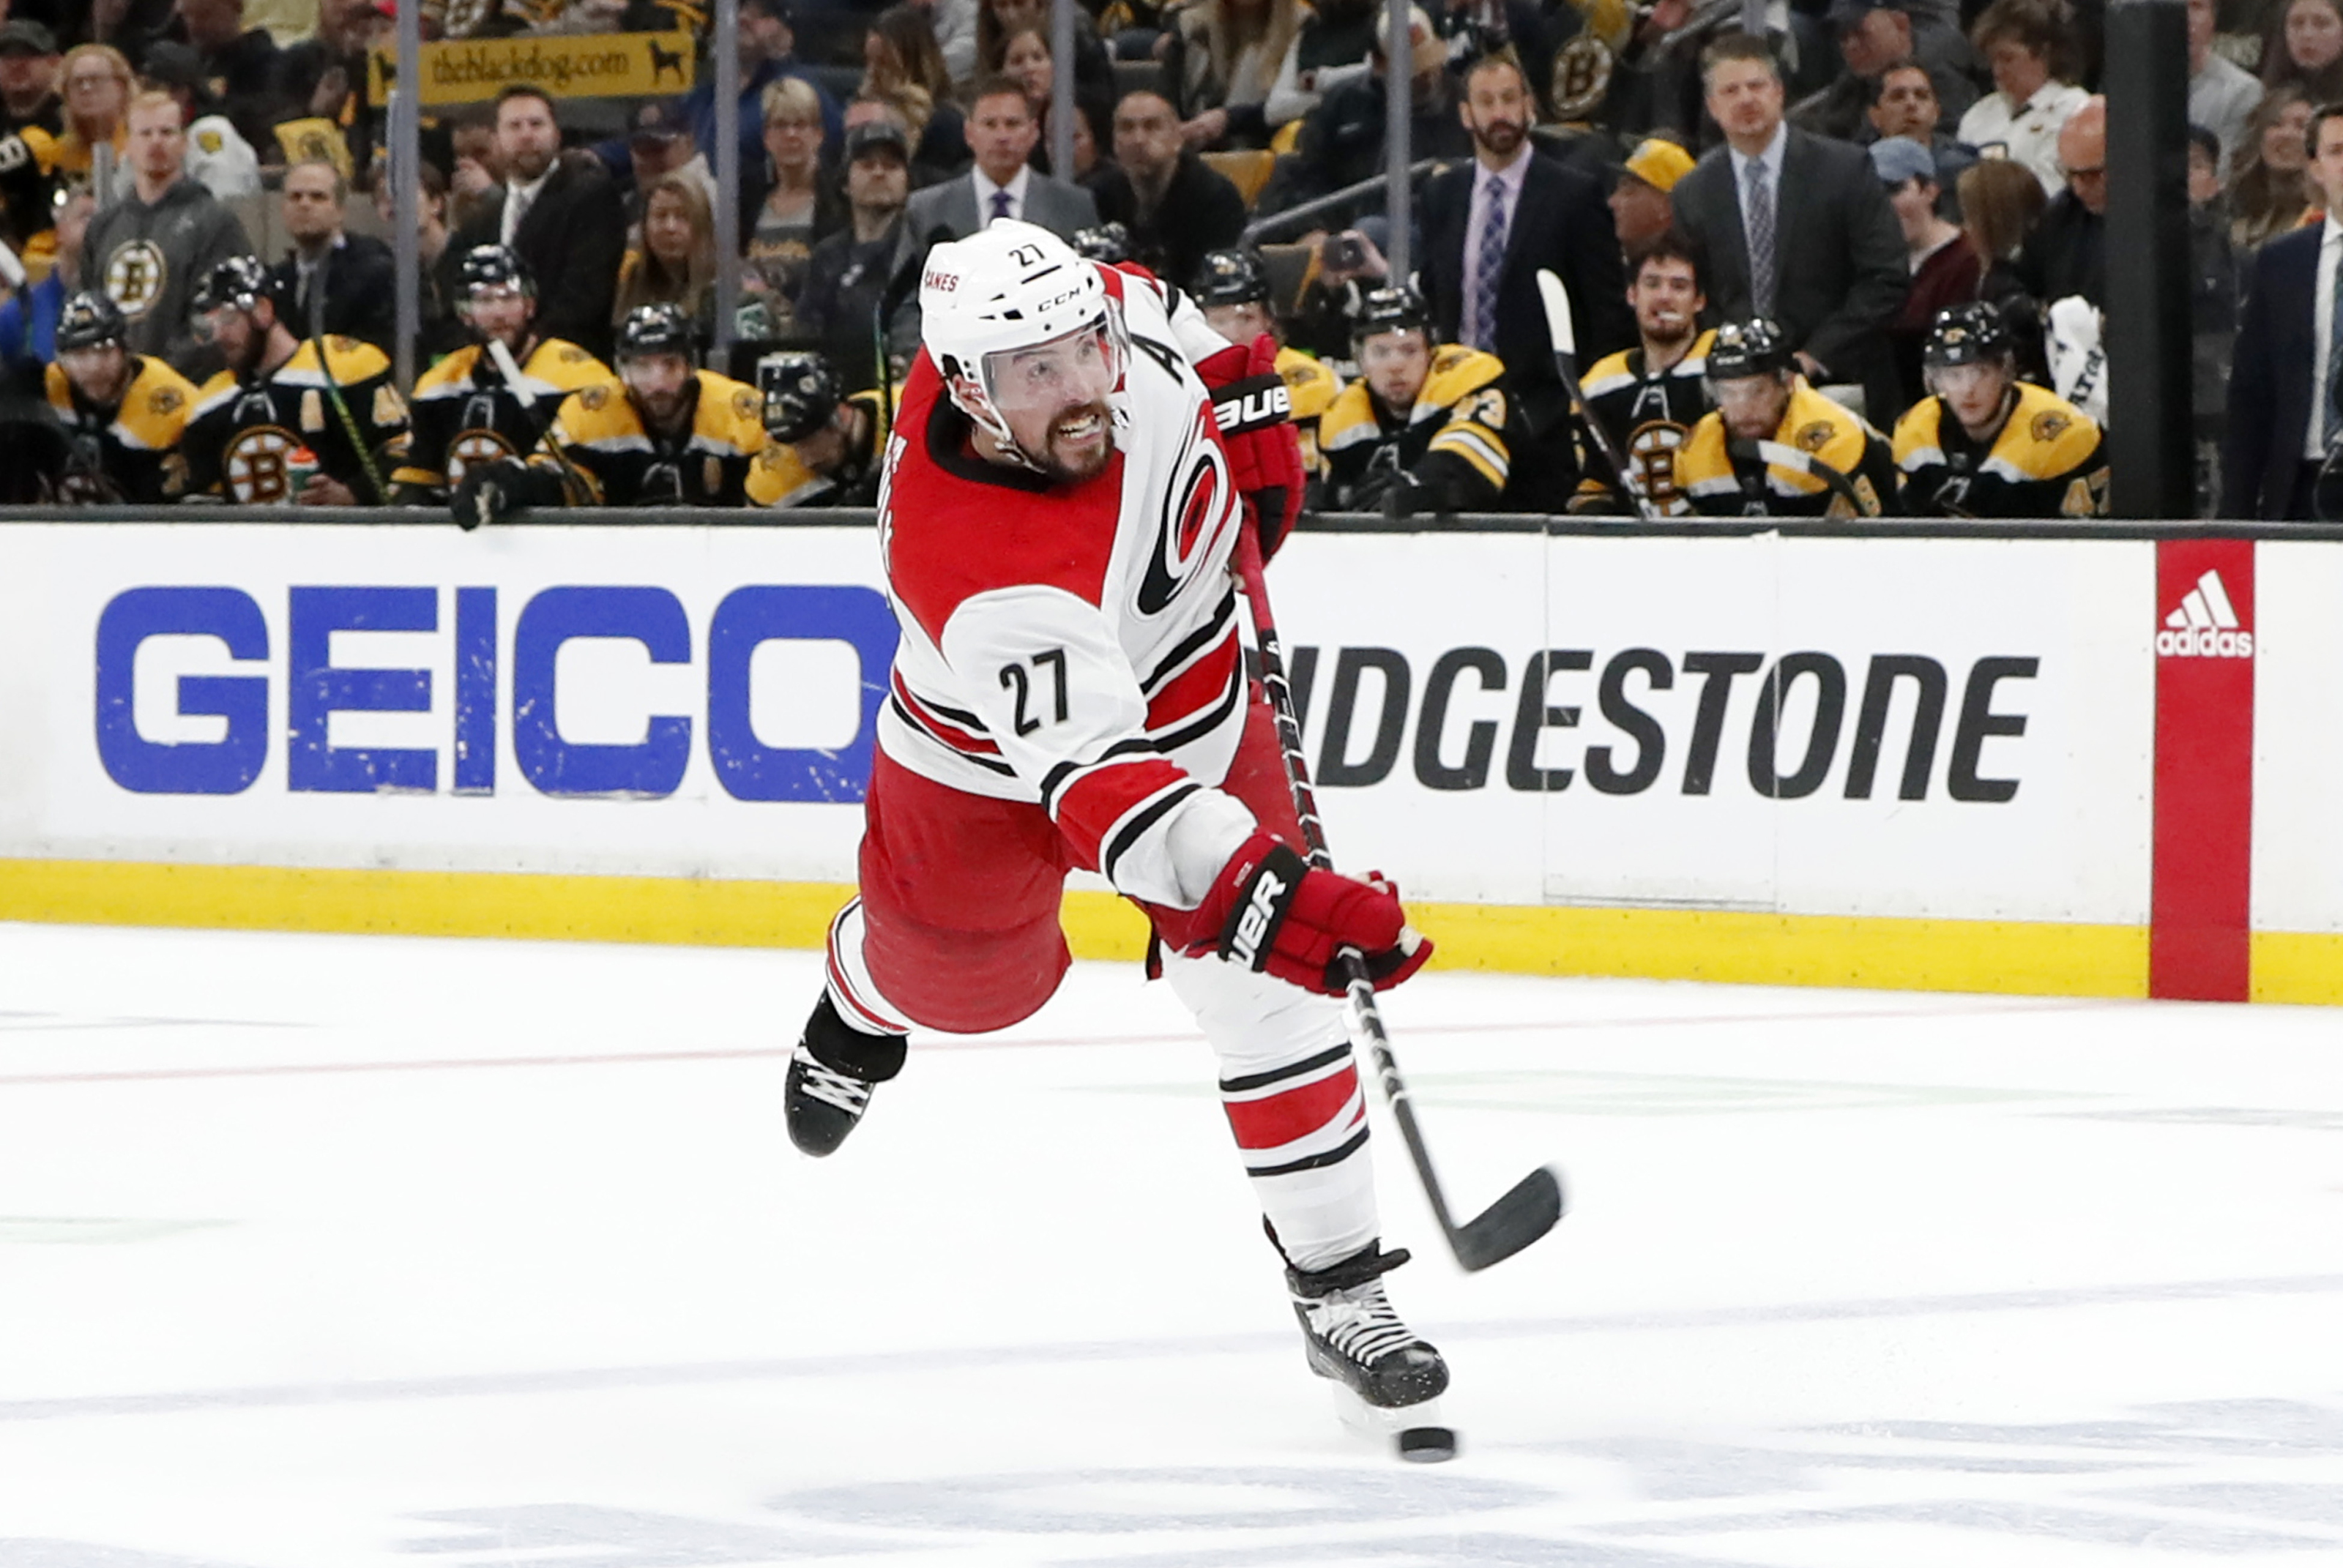 Blues acquire Justin Faulk from Hurricanes, sign him to seven-year extension